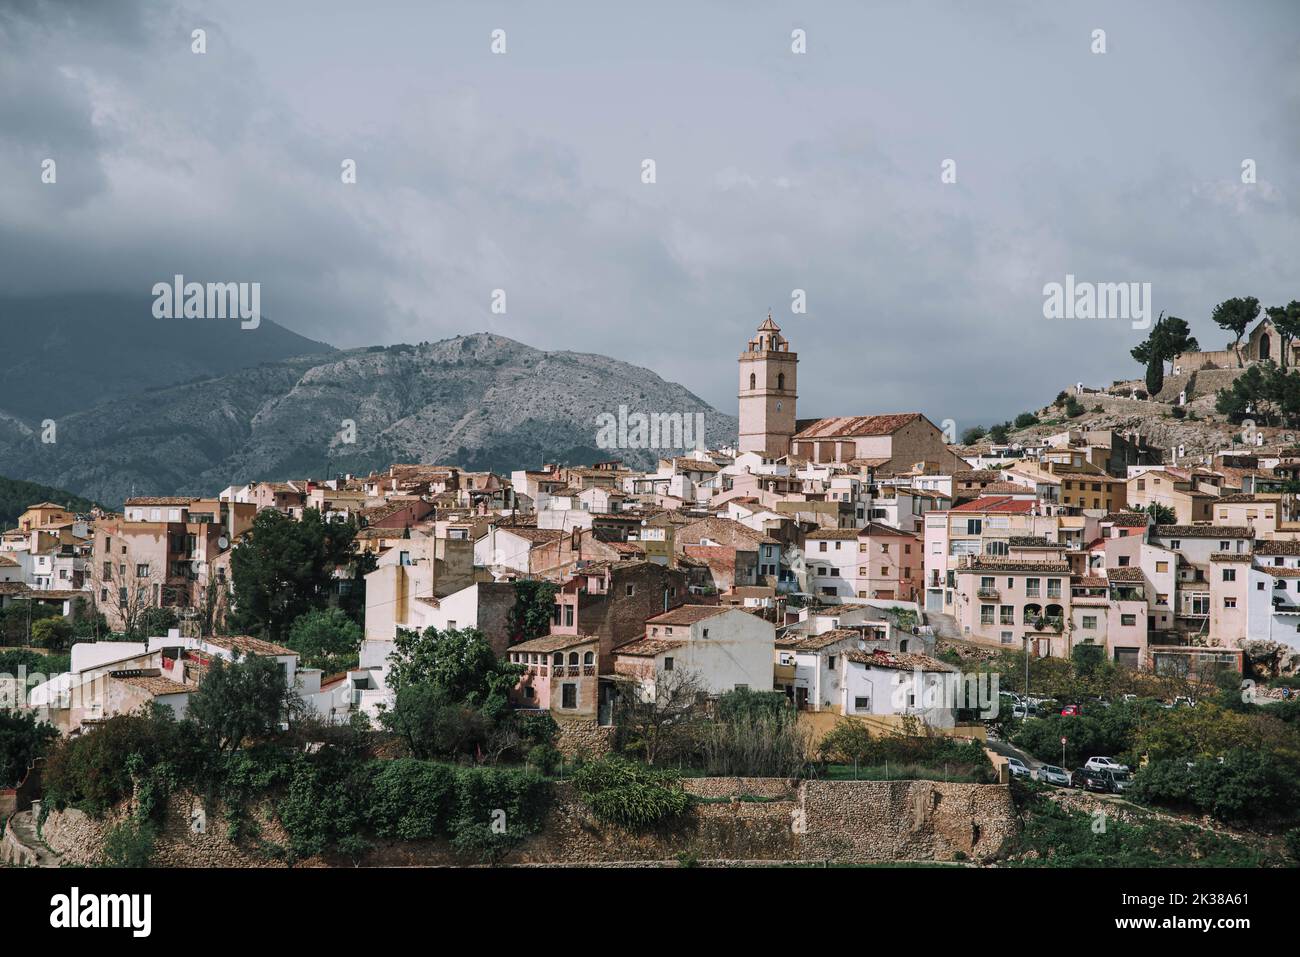 A cityscape of La Nucia in Valencian Community, Spain with mountains in the background Stock Photo